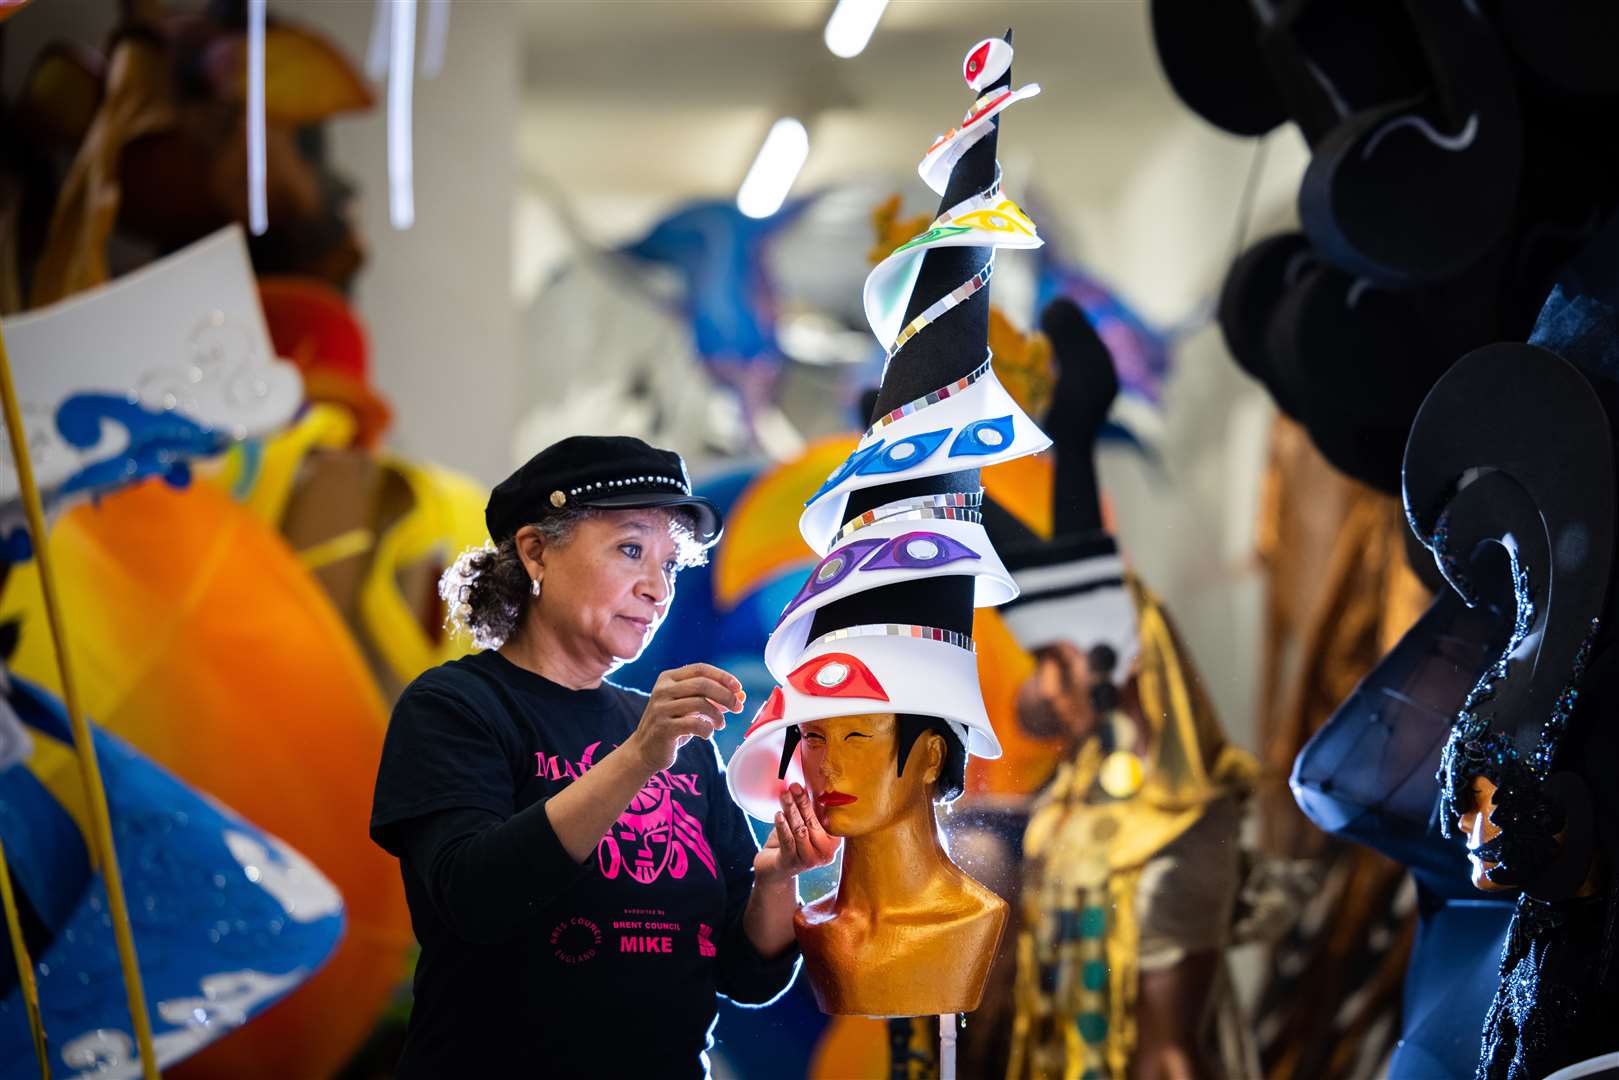 Clary Salandy adjusts a costume for the first virtual Notting Hill Carnival at her shop in Harlesden, north London (Aaron Chown/PA)